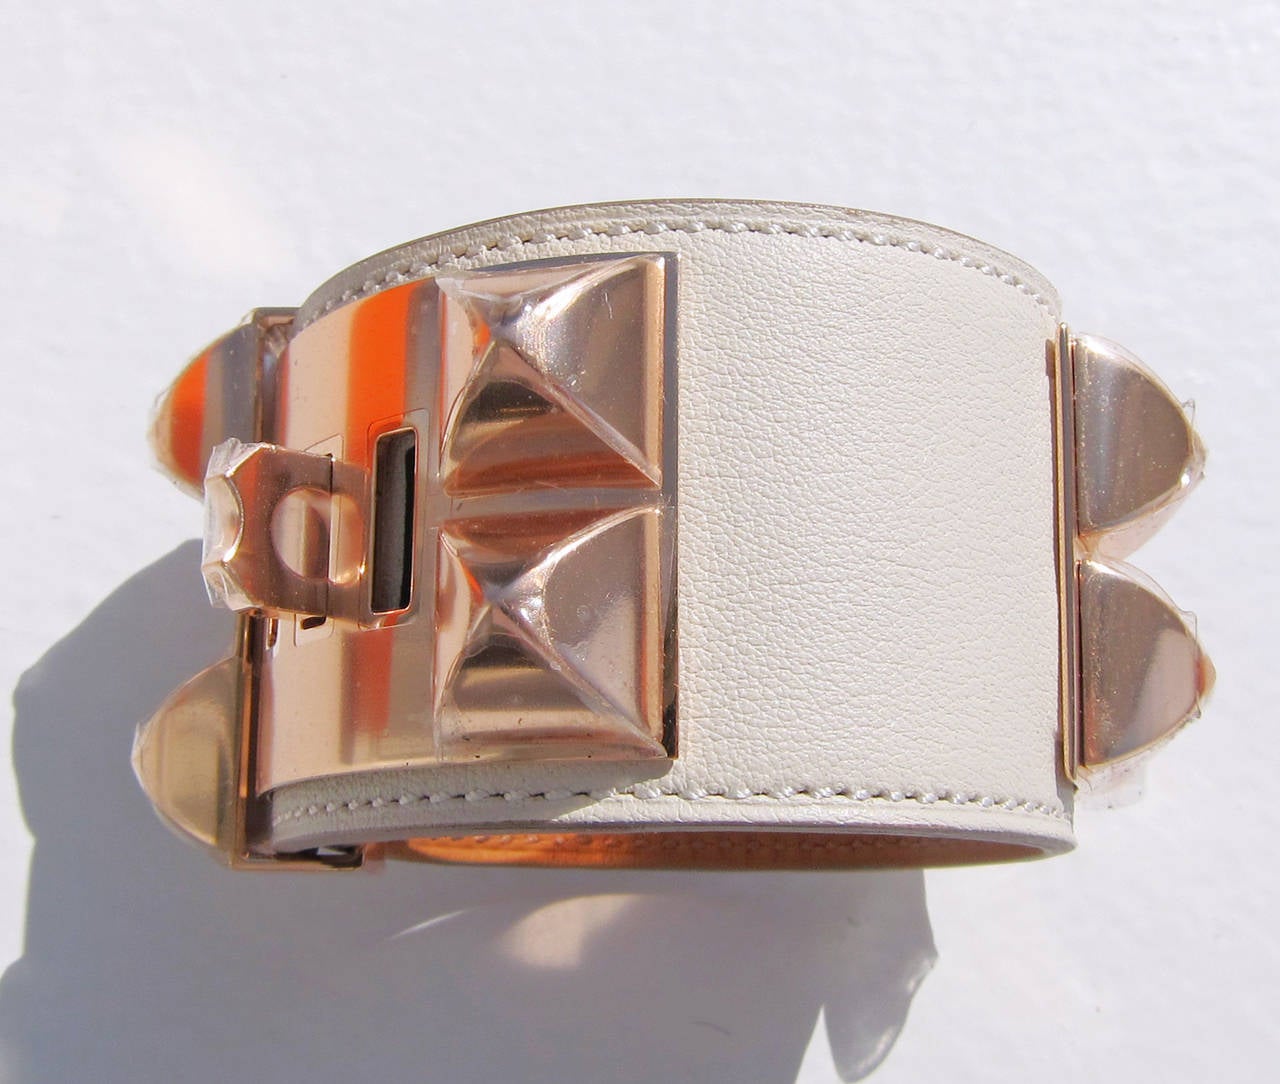 Hermes Collier de Chien CDC Bracelet CRAIE Swift Leather with ROSE Gold Hardware 1